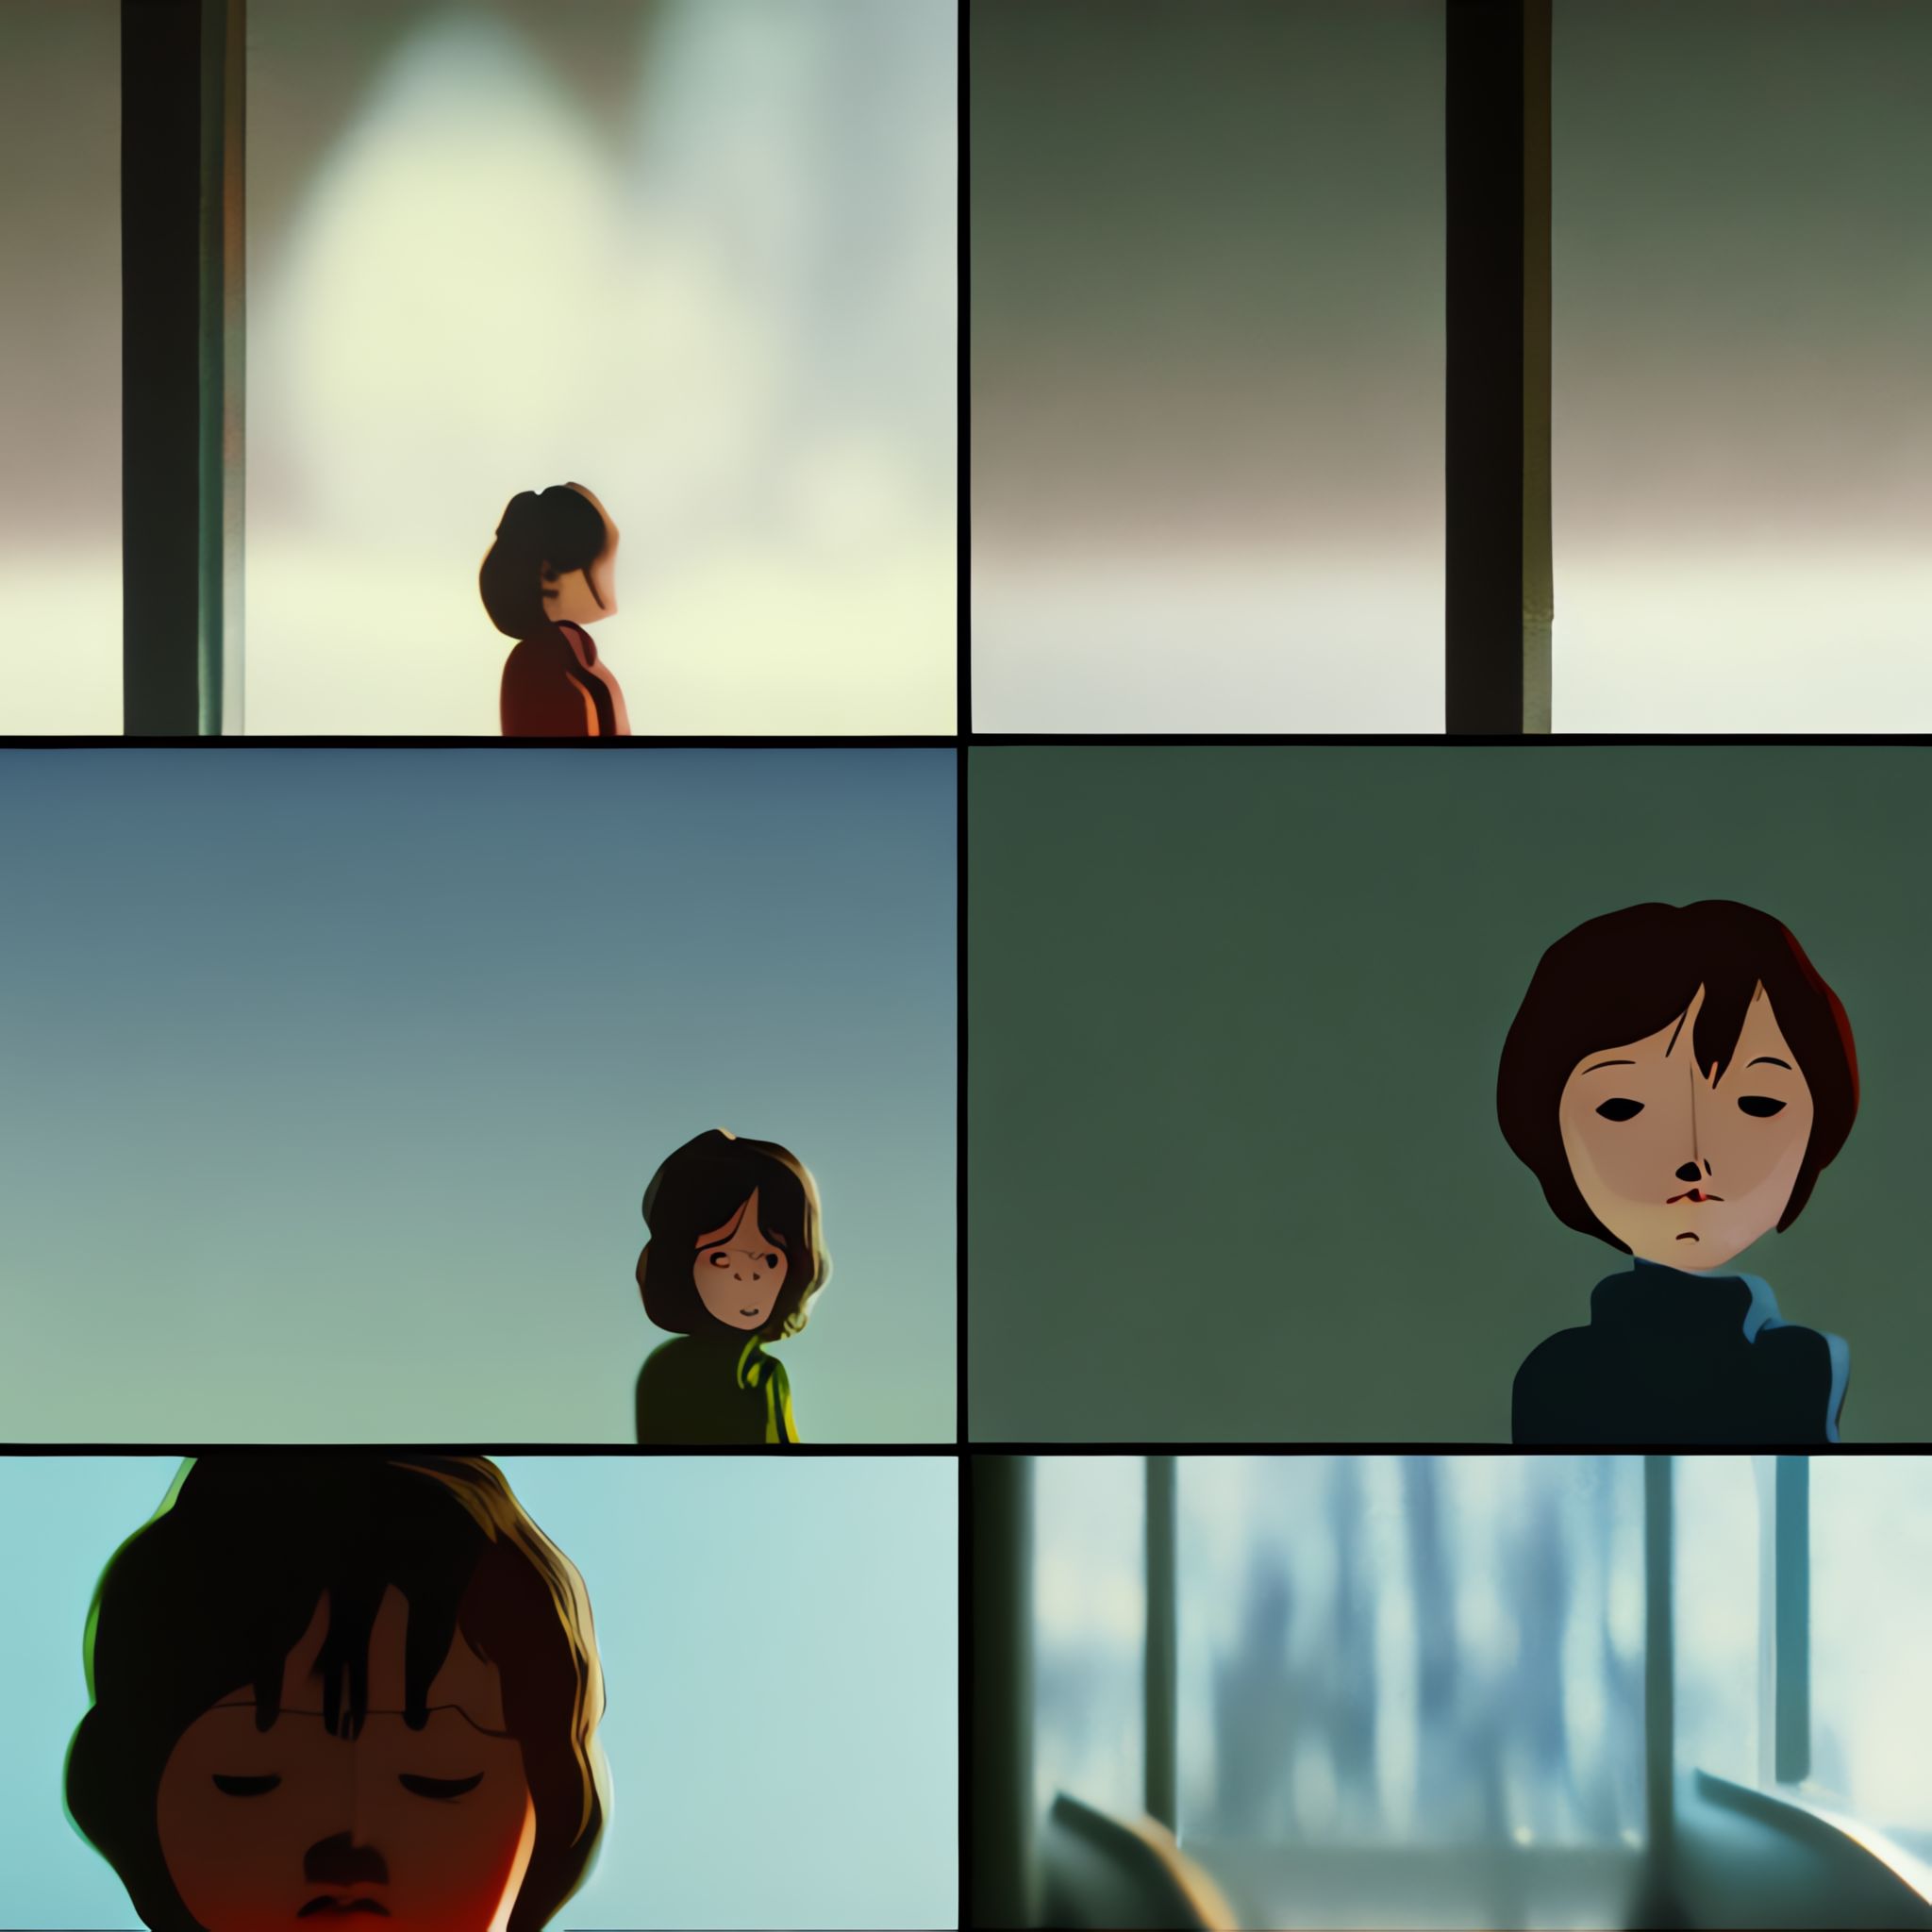 Cinematic-scene-from-Don't-Look-Now-directed-by-hayao-miyazaki-cold-color-sharp-focus-face-focused-t-5qss